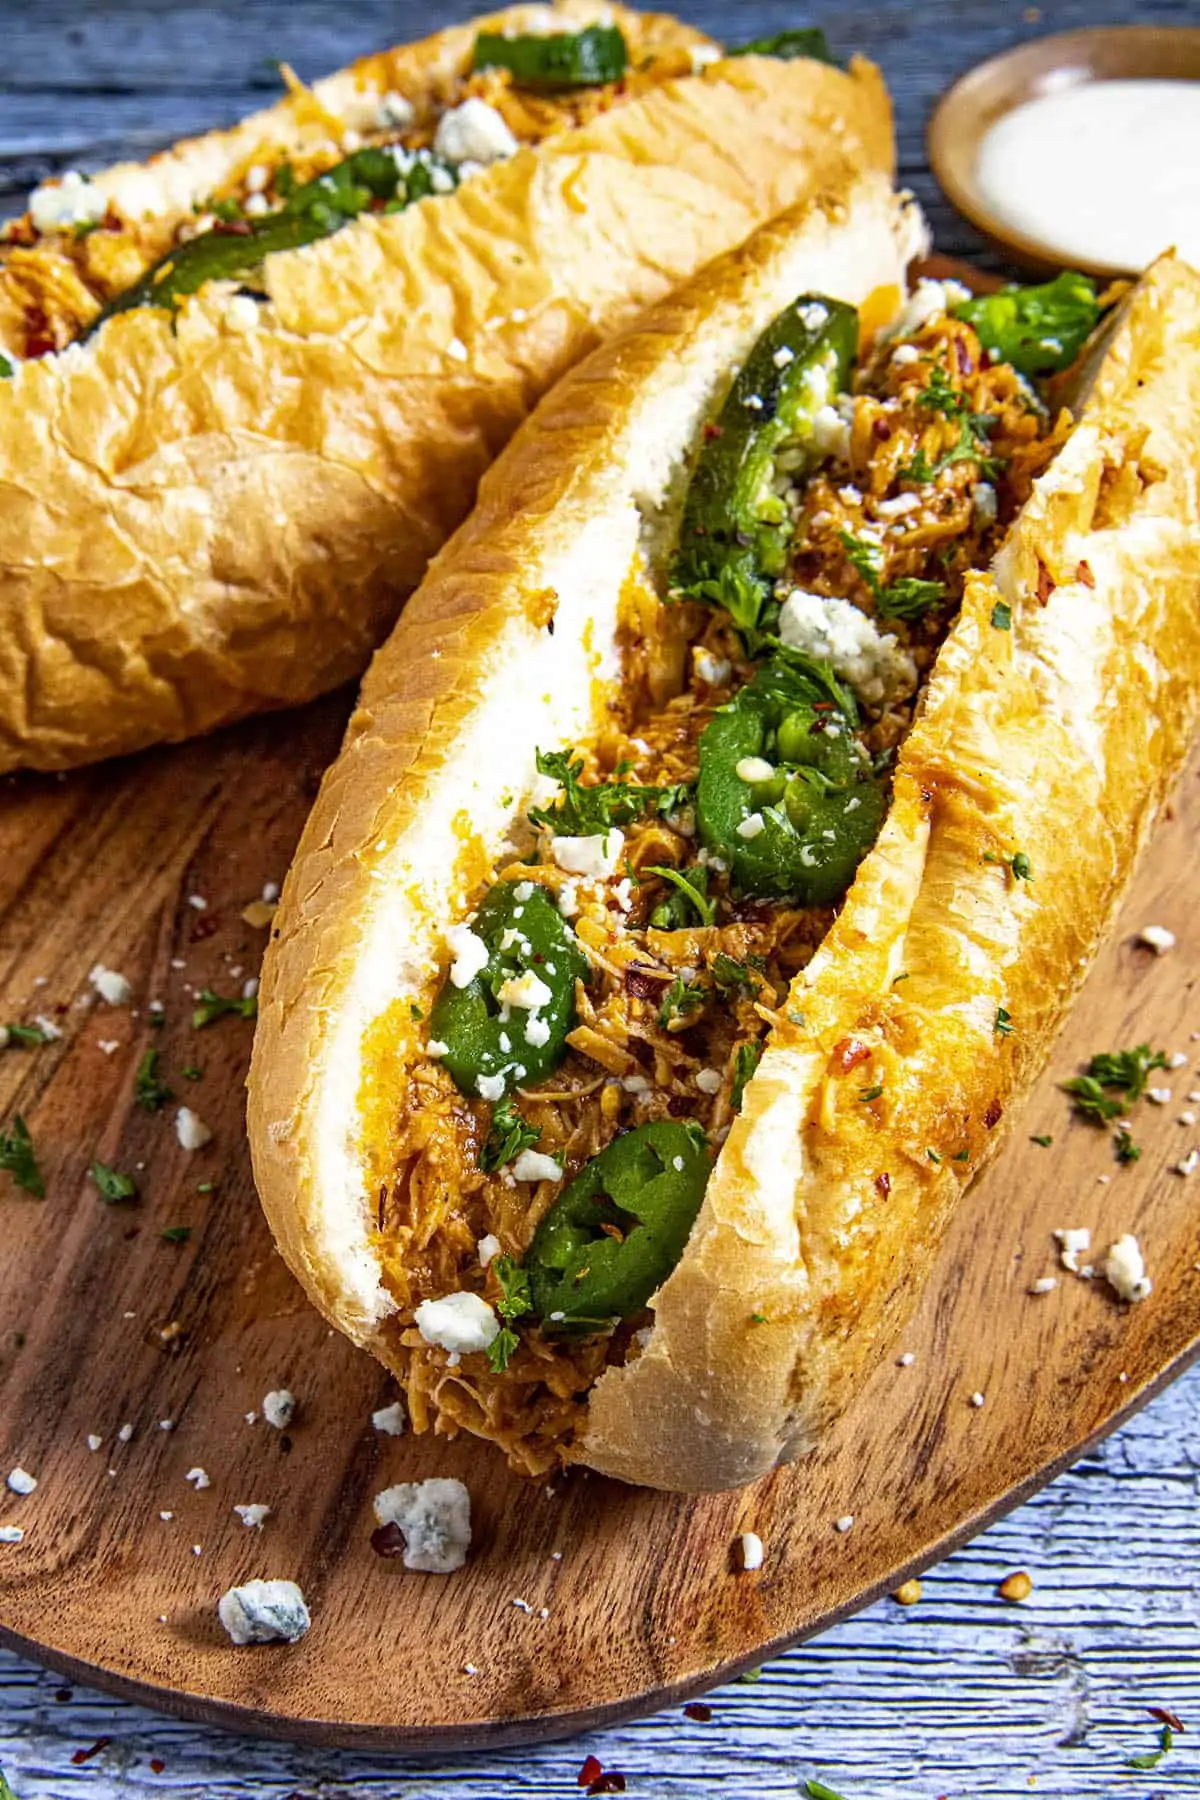 Buffalo Chicken Sandwiches with blue cheese crumbles and roasted jalapenos